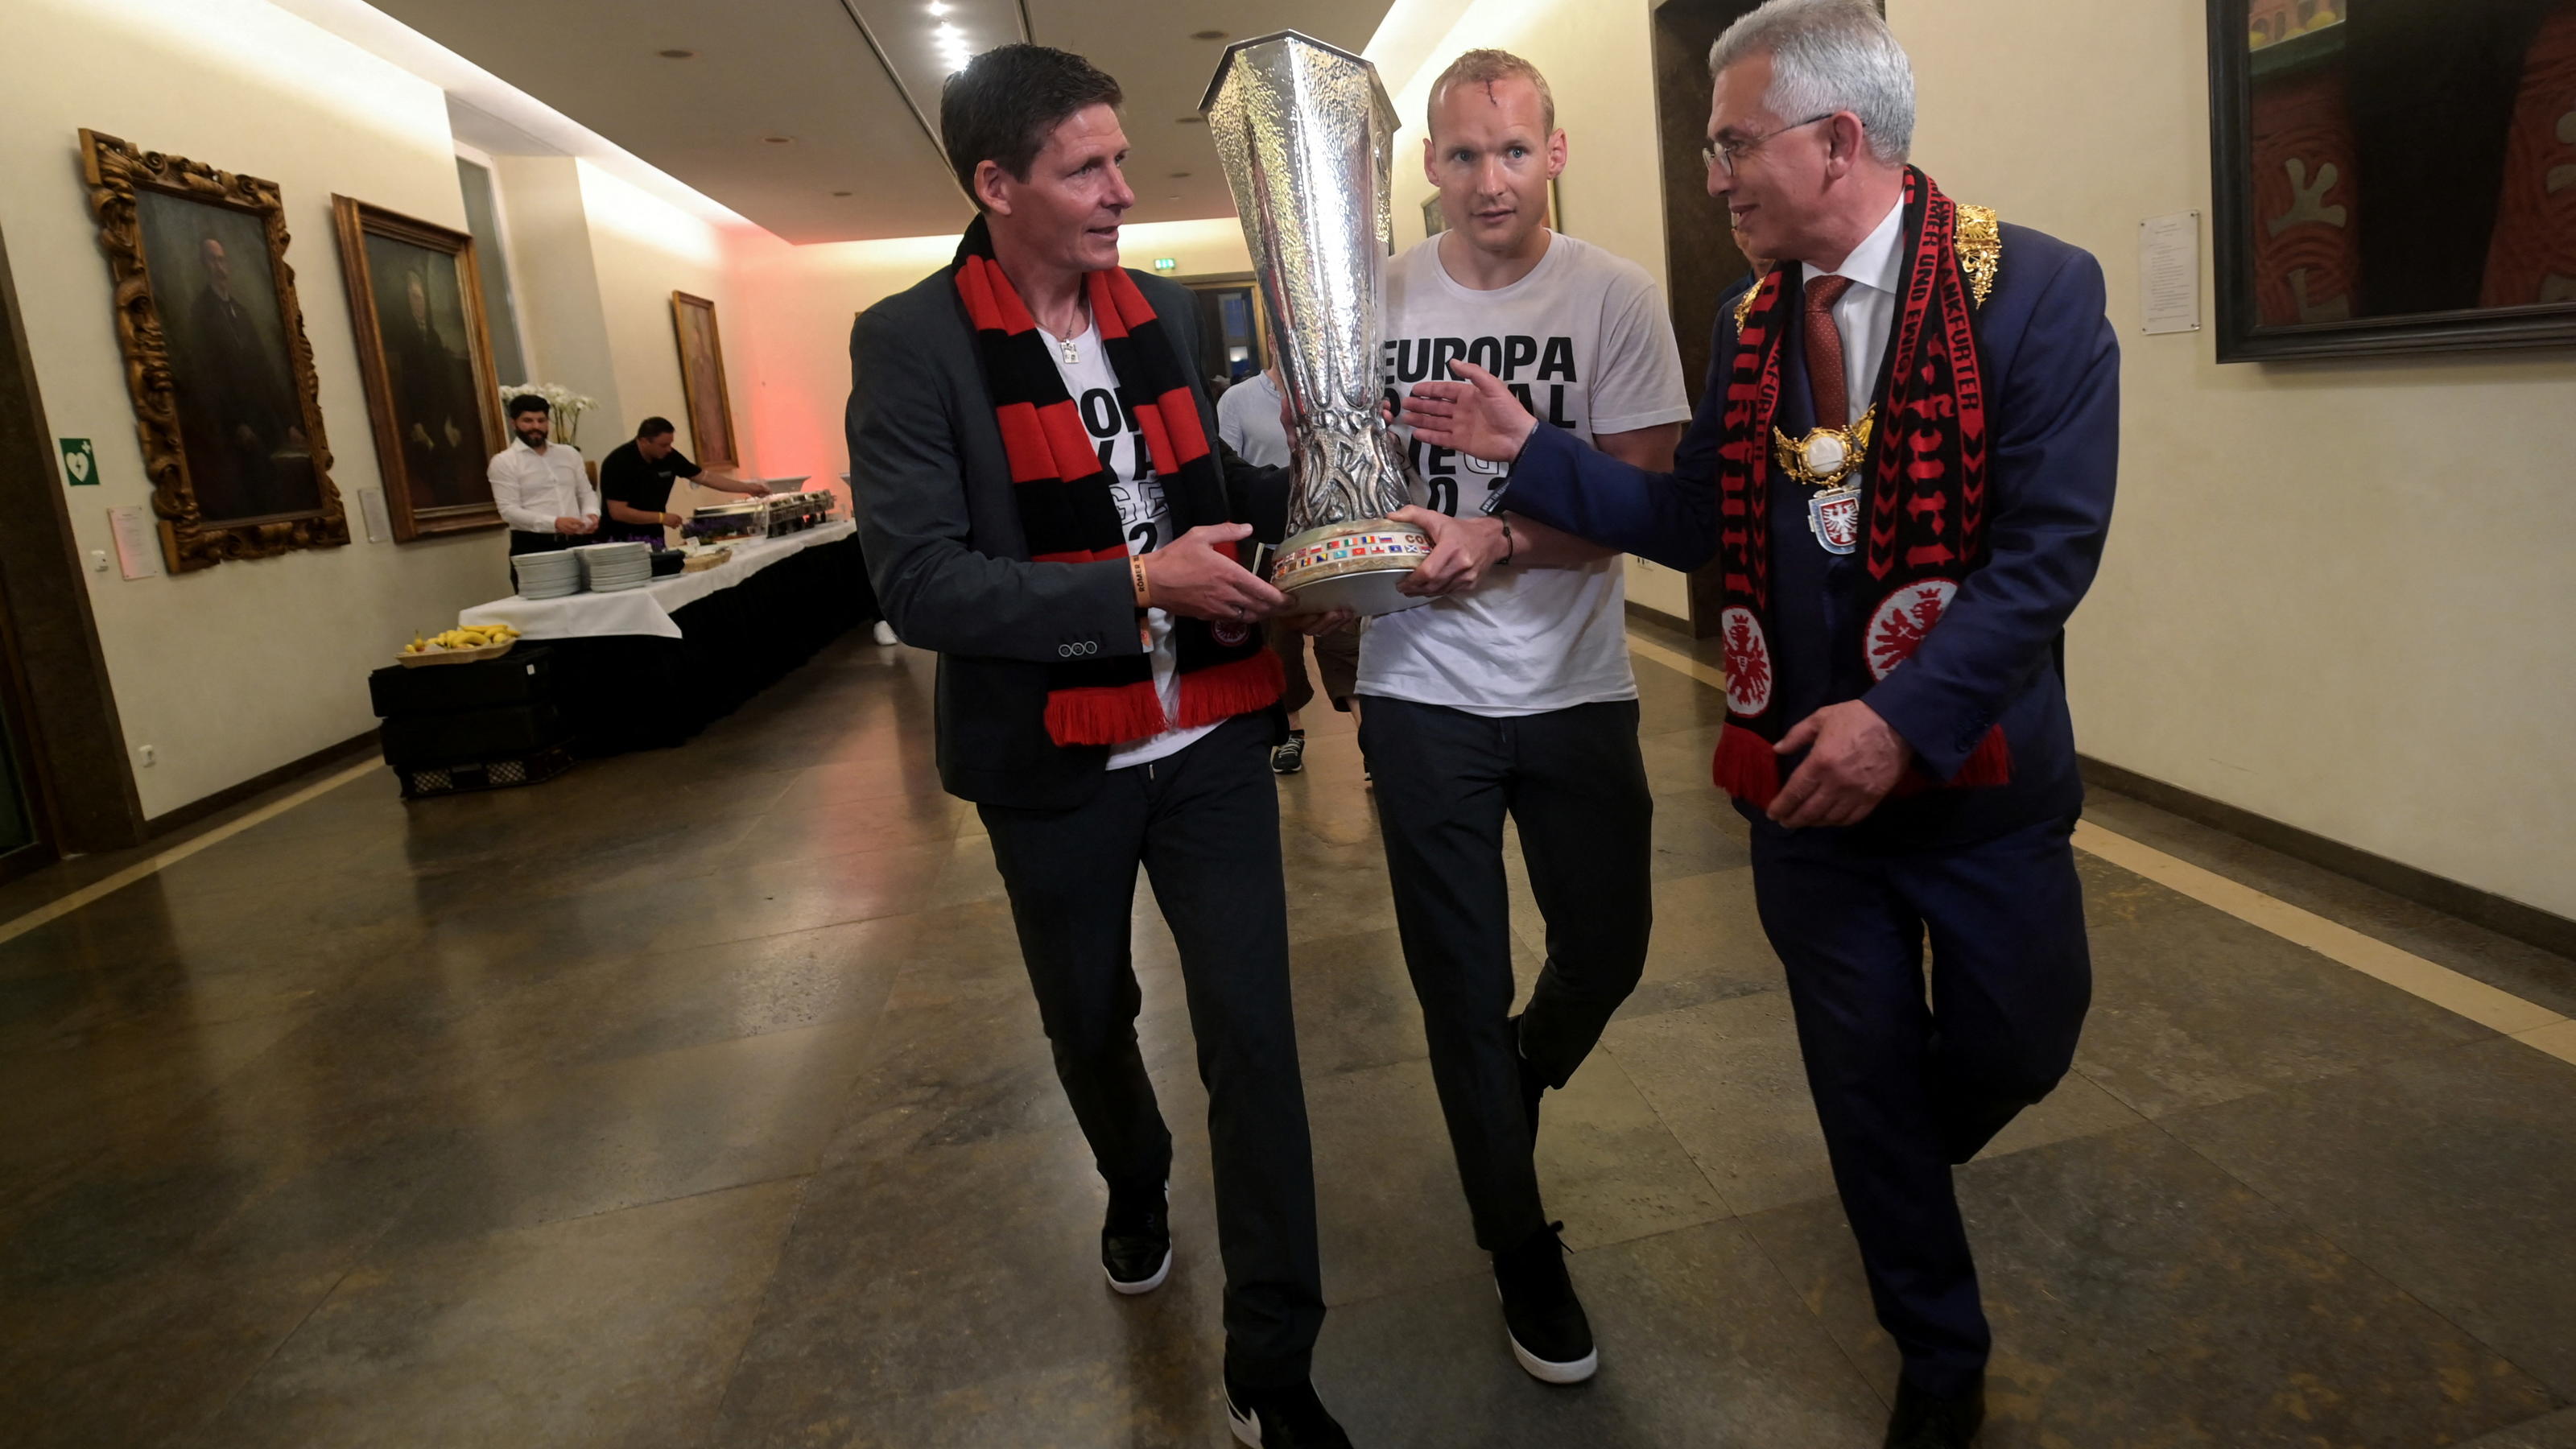 Soccer Football - Eintracht Frankfurt fans celebrate after winning the Europa League Final against Rangers - Frankfurt, Germany - May 19, 2022 Eintracht Frankfurt's Sebastian Rode, coach Oliver Glasner and major Peter Feldmann walk with the cup at th